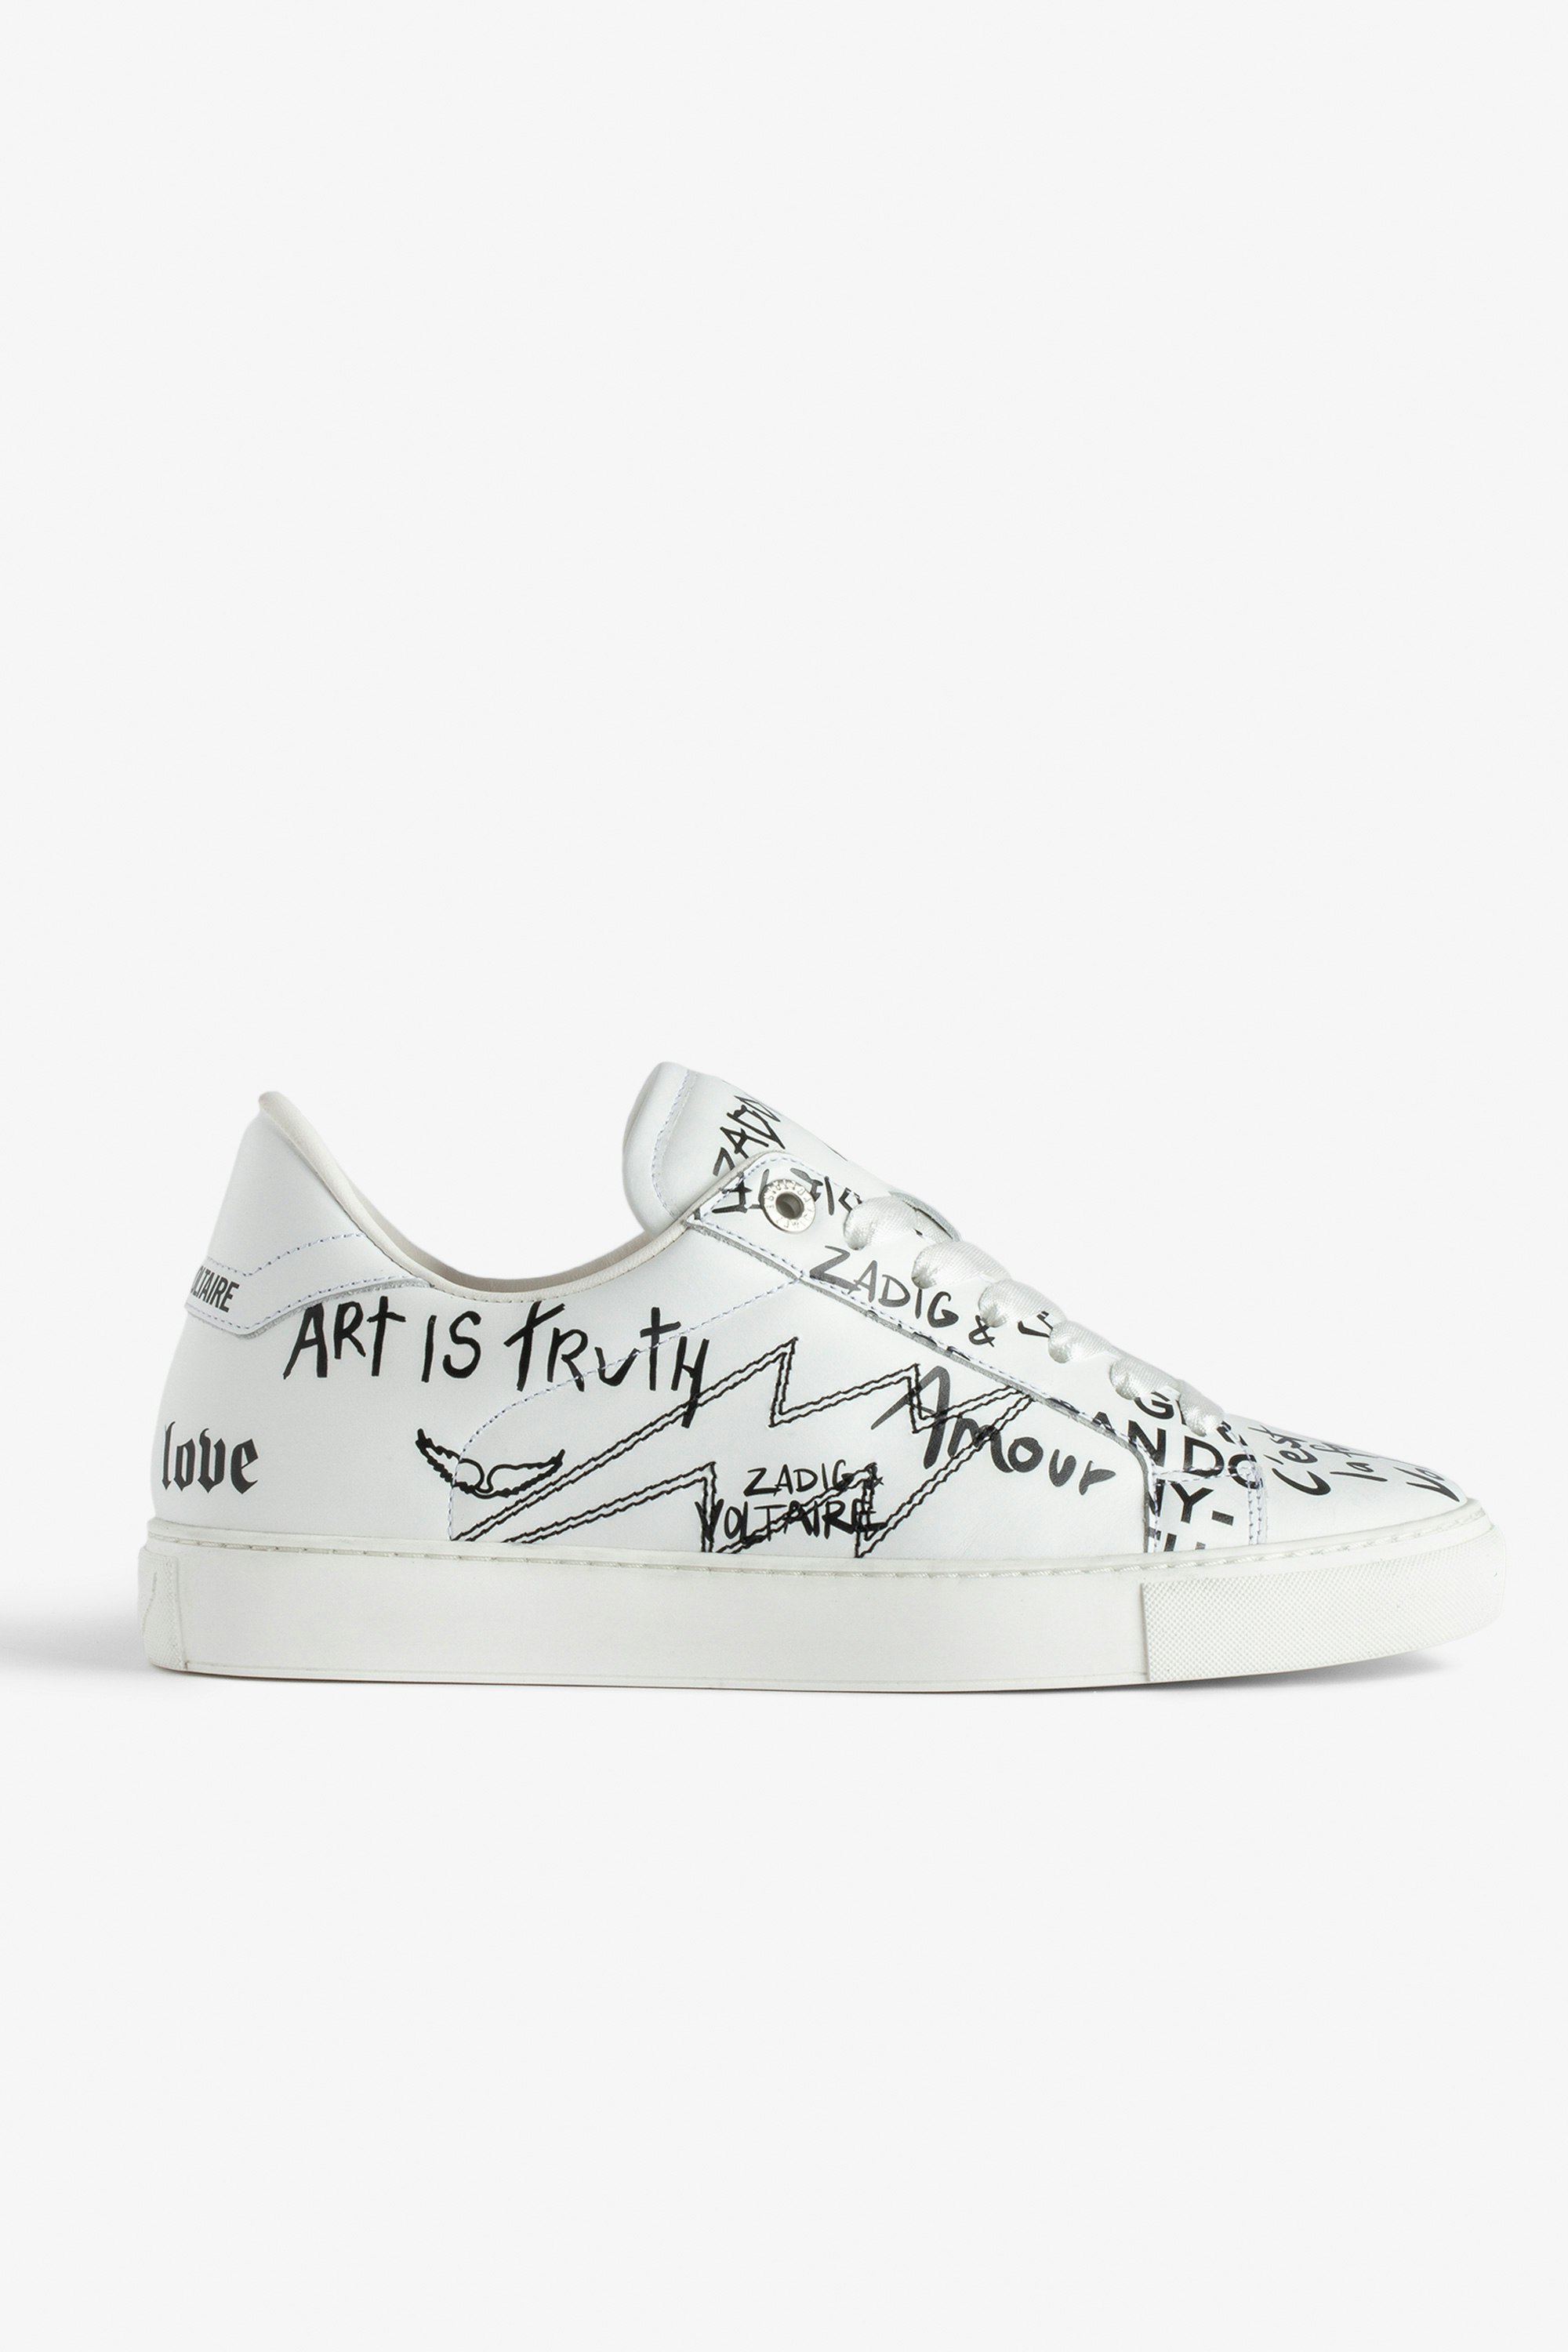 ZV1747 La Flash Low-Top Trainers - Women’s white smooth leather low-top trainers with lightning bolt panels and graffiti.